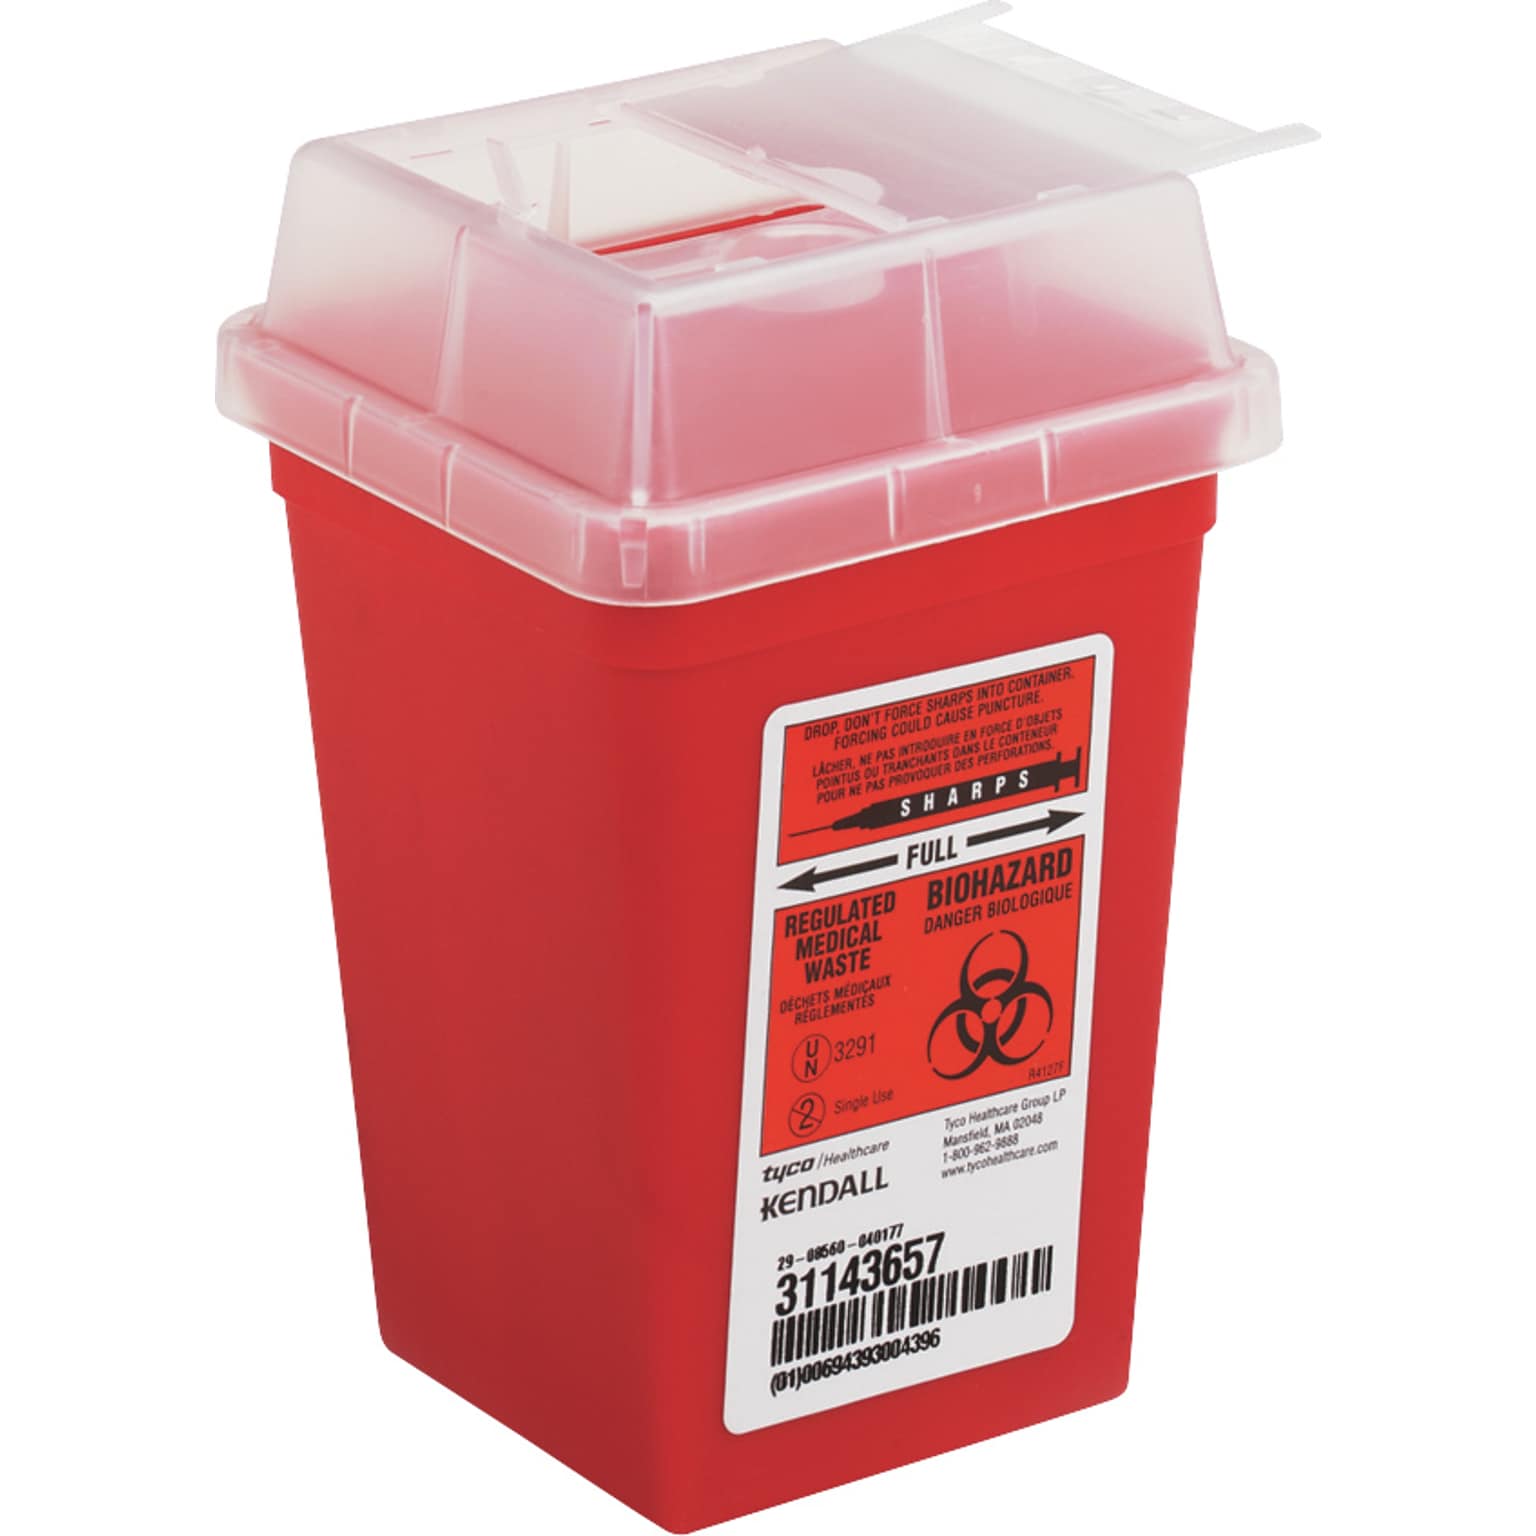 Impact Sharps Waste Containers, Red, 1 Quart, 6 3/4H x 4 1/2W x 4 1/2D